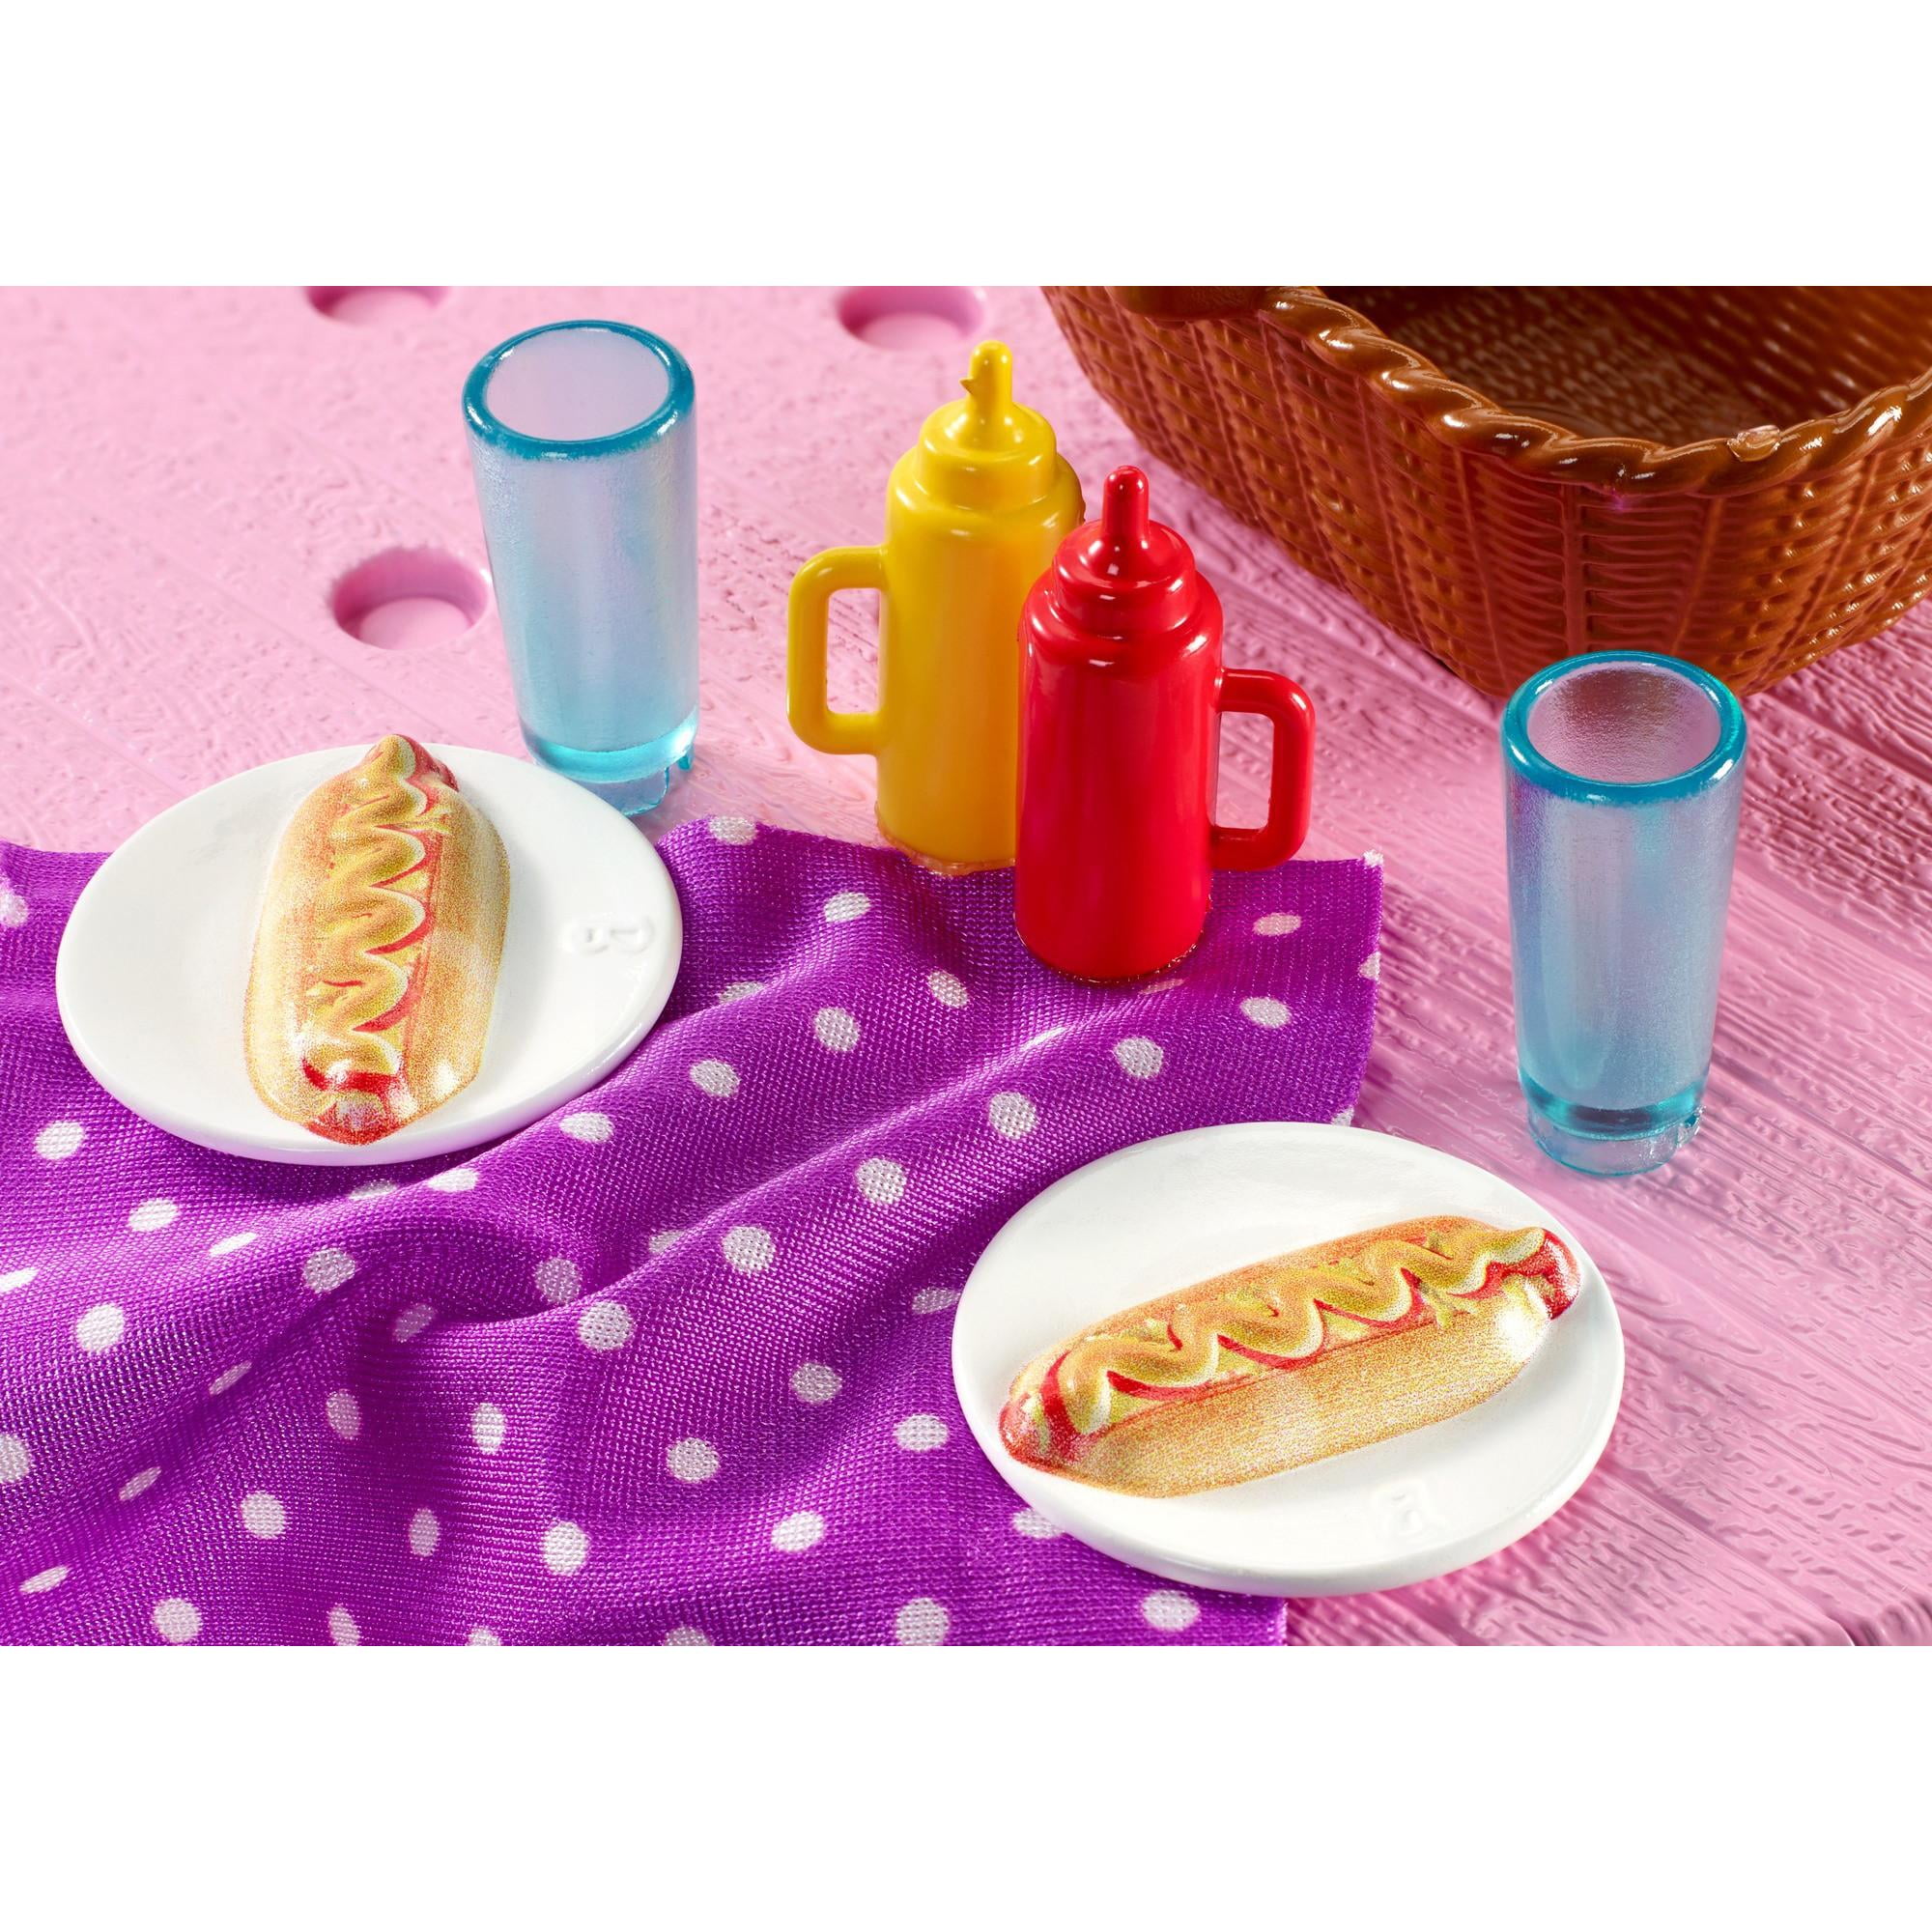 Barbie Estate Picnic Table Set with Themed Accessories